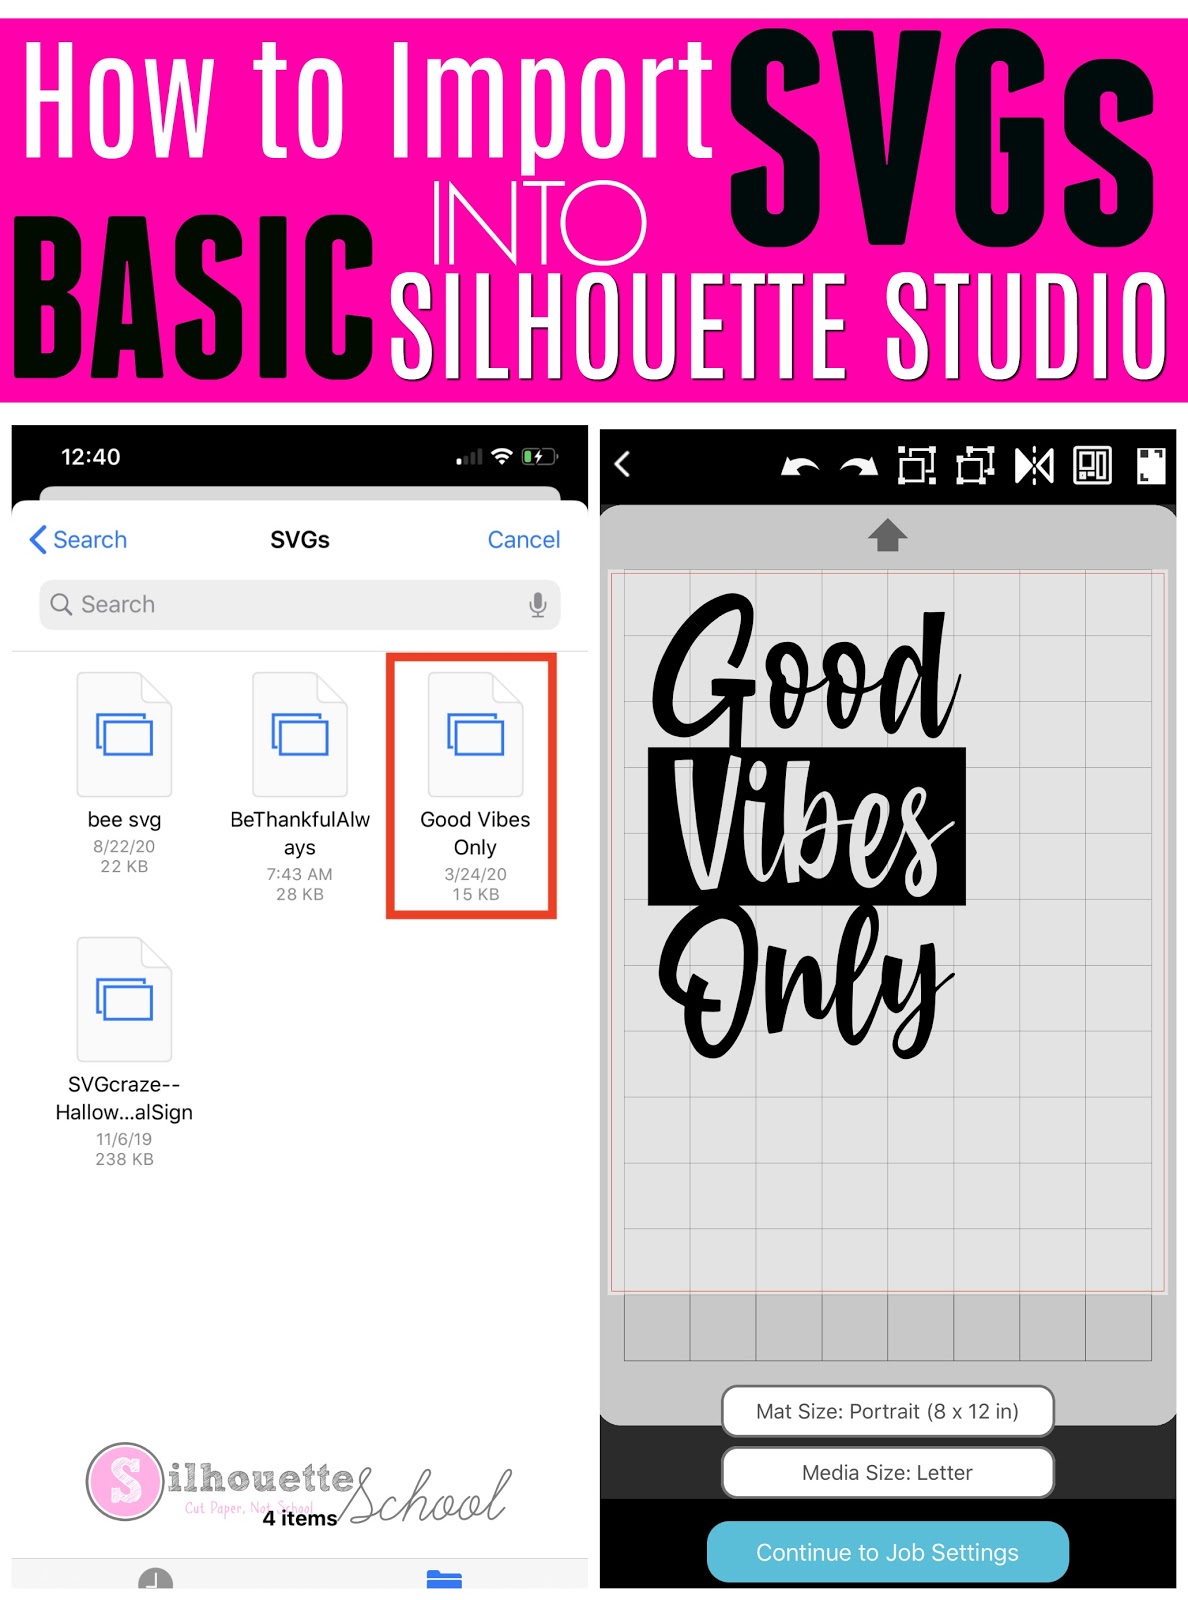 Download How To Import Svgs Into Silhouette Studio Basic Edition Silhouette School